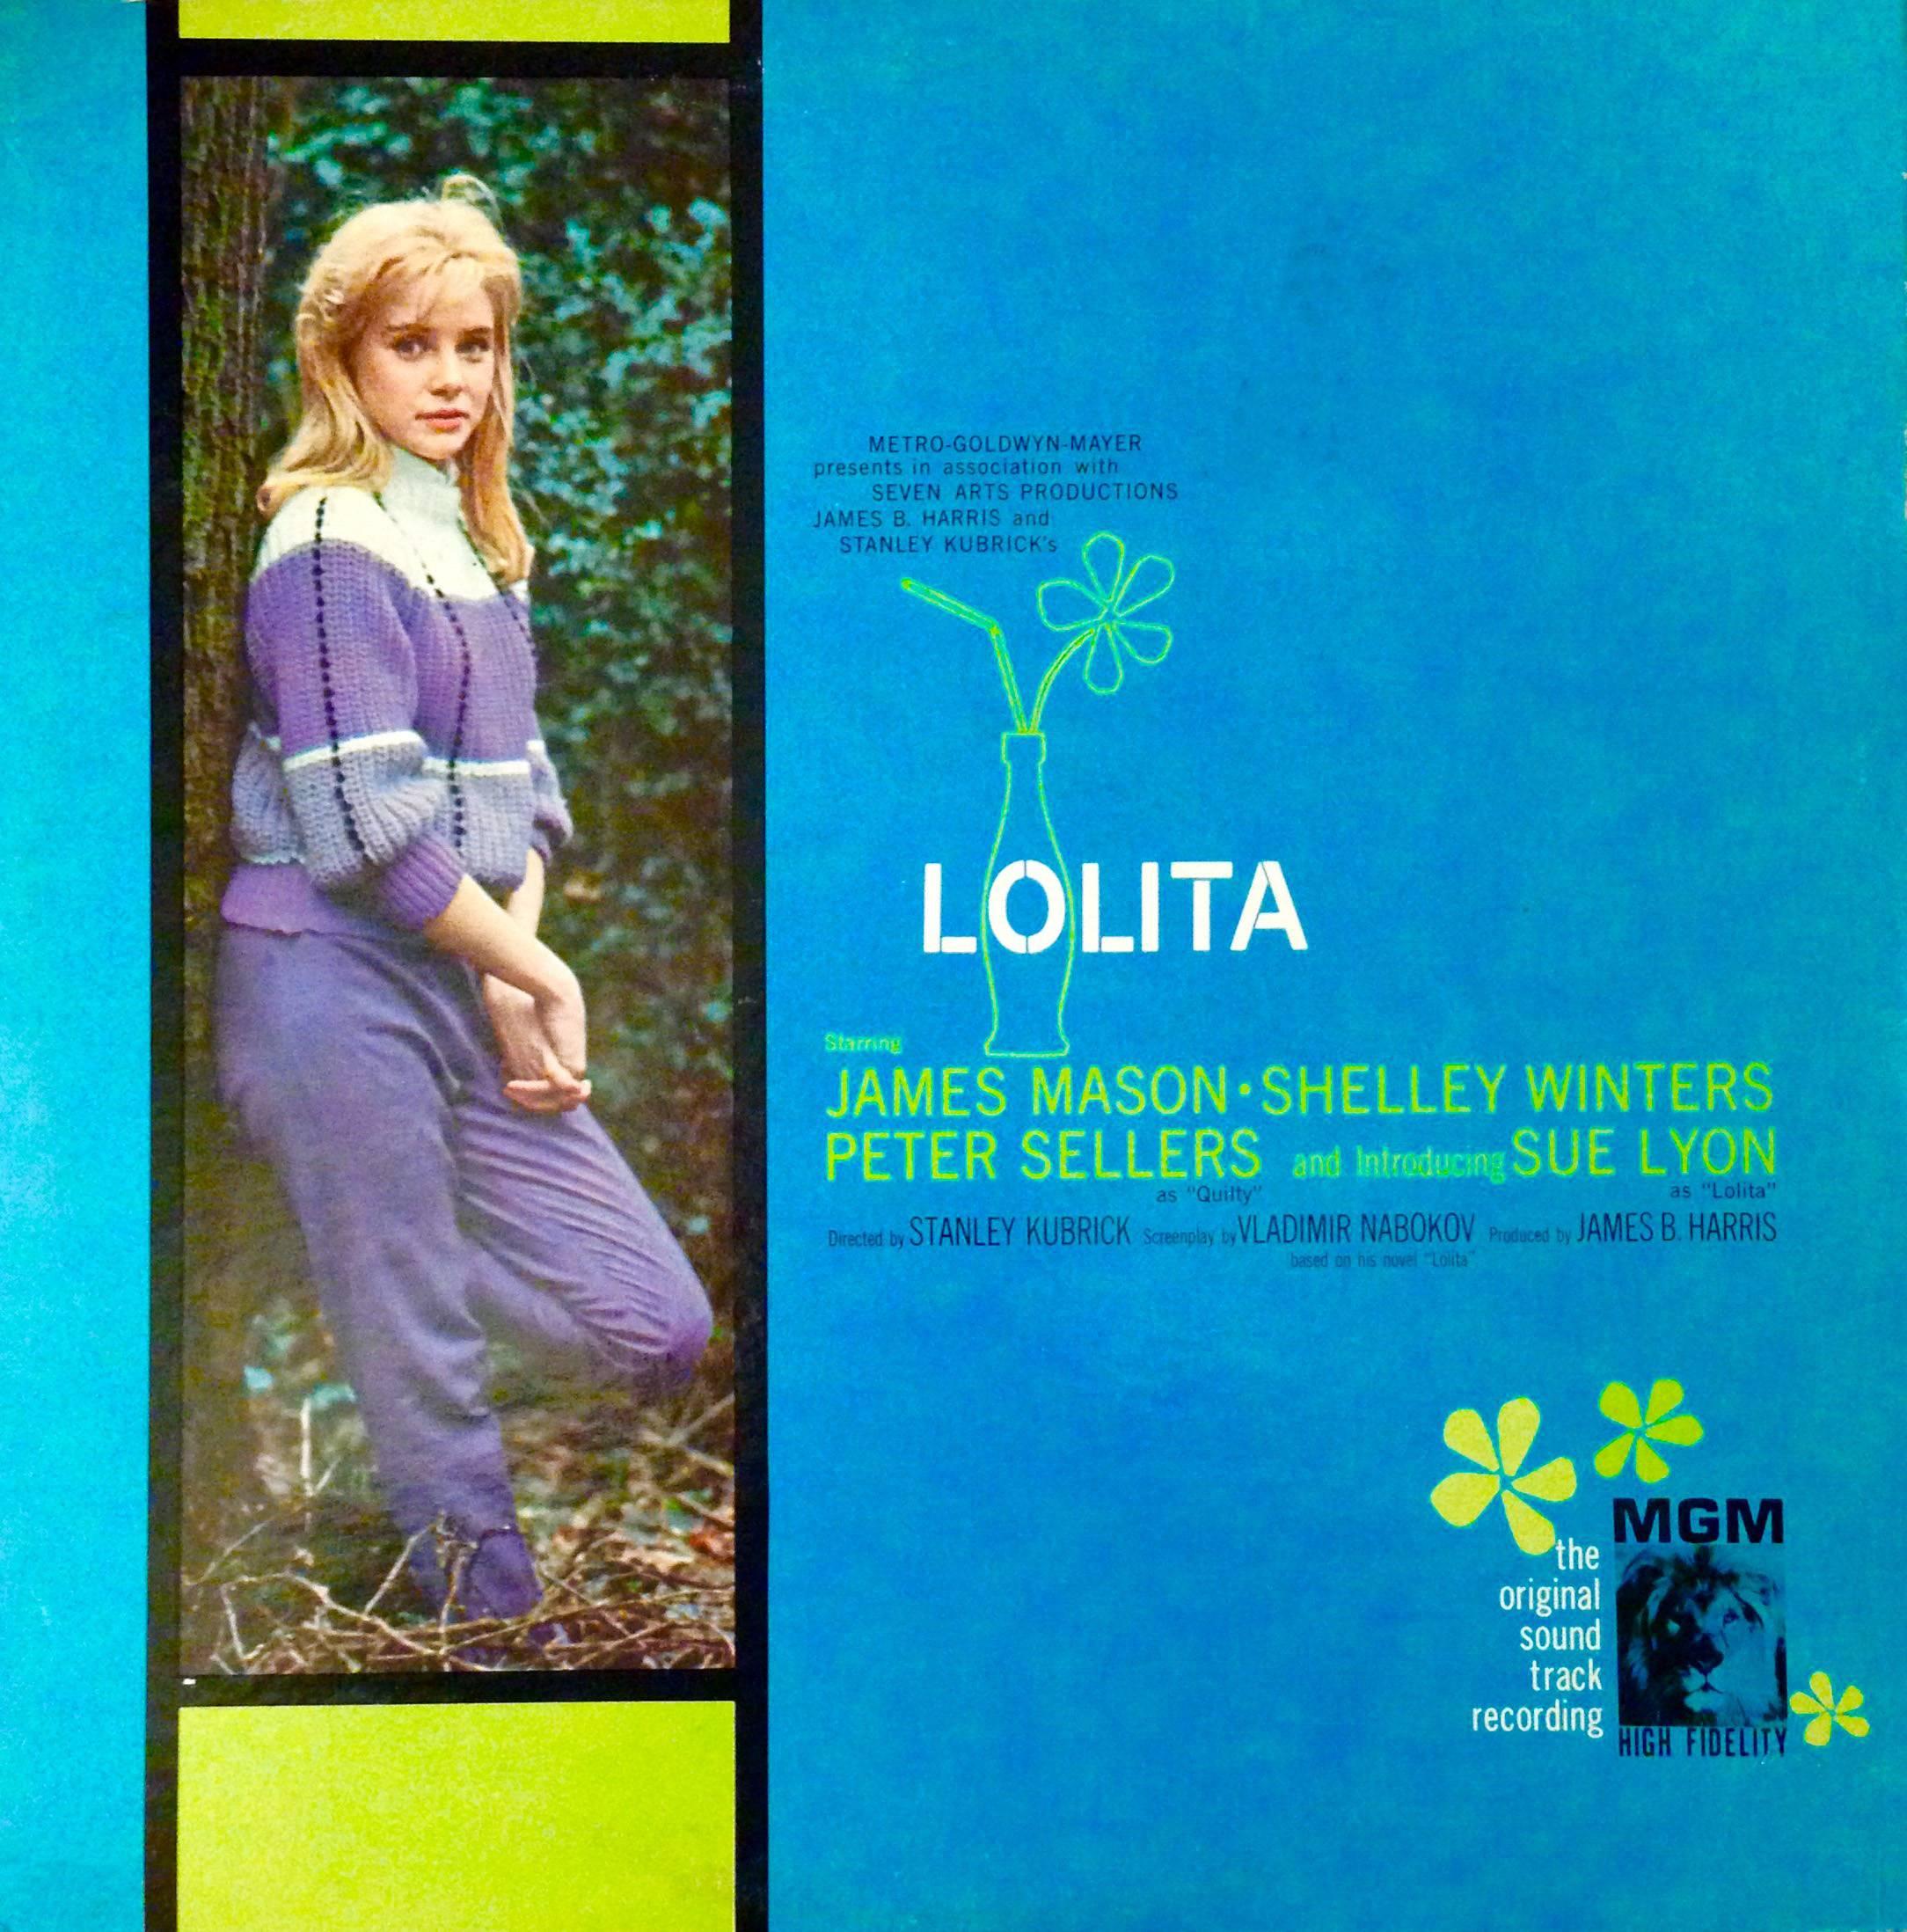 Vintage original 1962 vinyl record soundtrack to Stanley Kubrick's famed Lolita sealed in its original packaging. This piece features art design in the style of the original theatrical poster and would look quite cool framed. 

Measures: 12 x 12